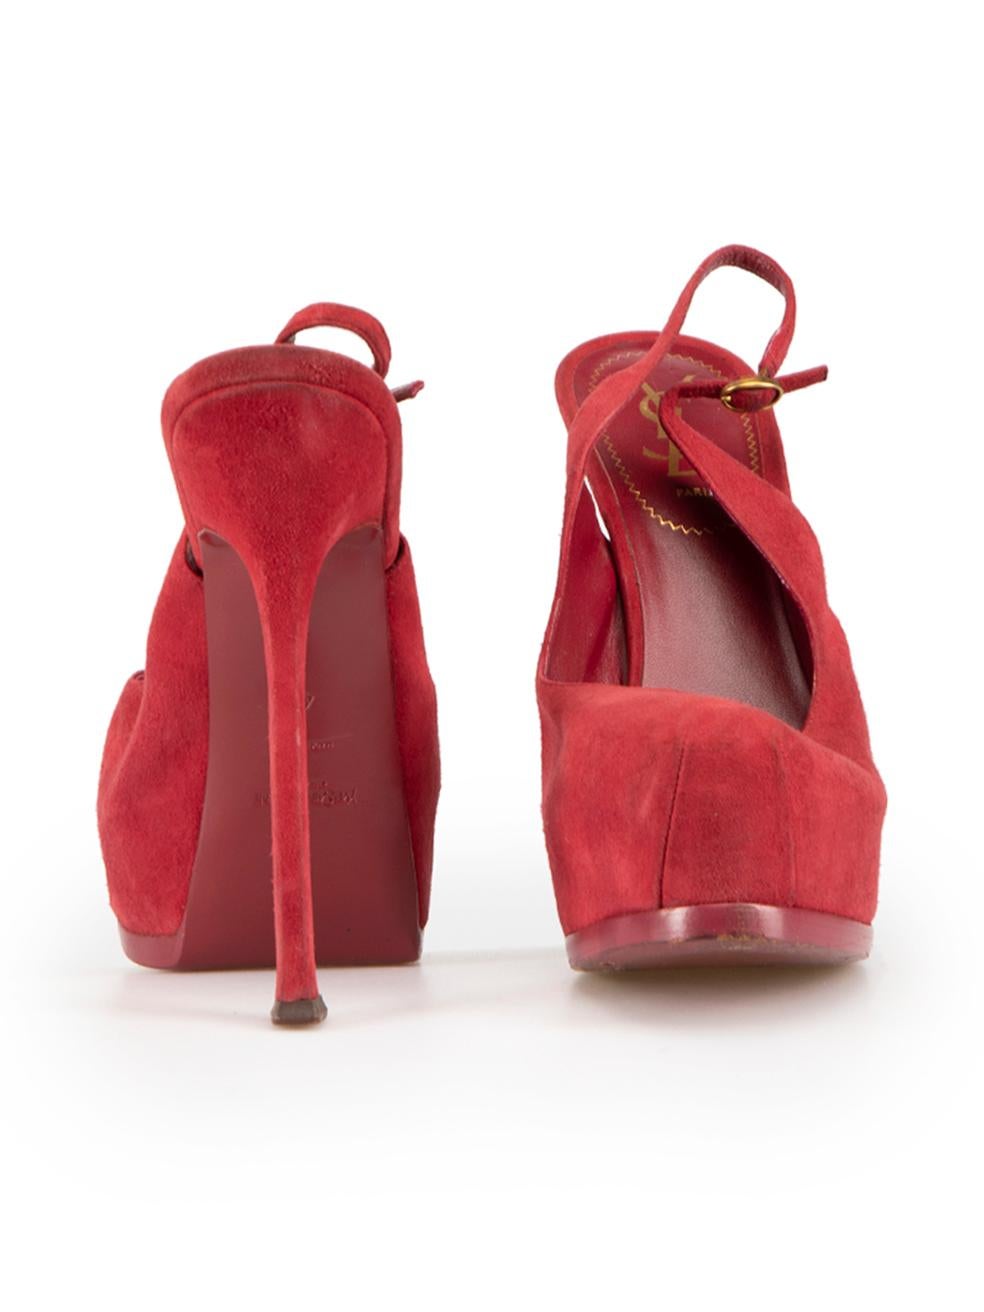 Saint Laurent Red Suede Platform Slingback Heels Size IT 40 In Good Condition For Sale In London, GB